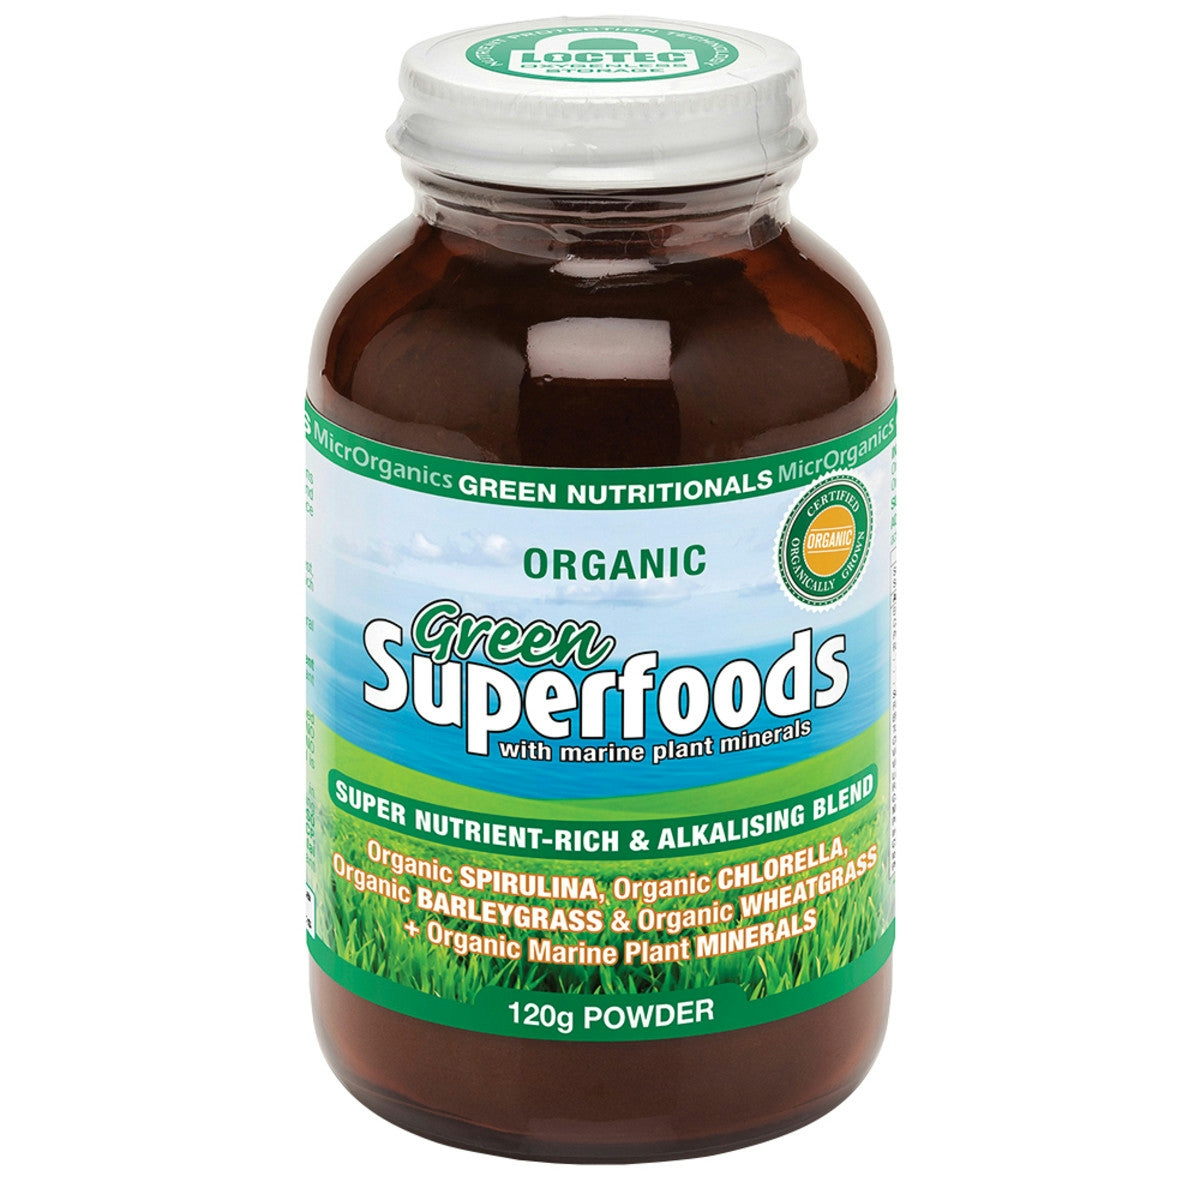 image of MicrOrganics Green Nutritionals Green Superfoods 120g Powder on white background 